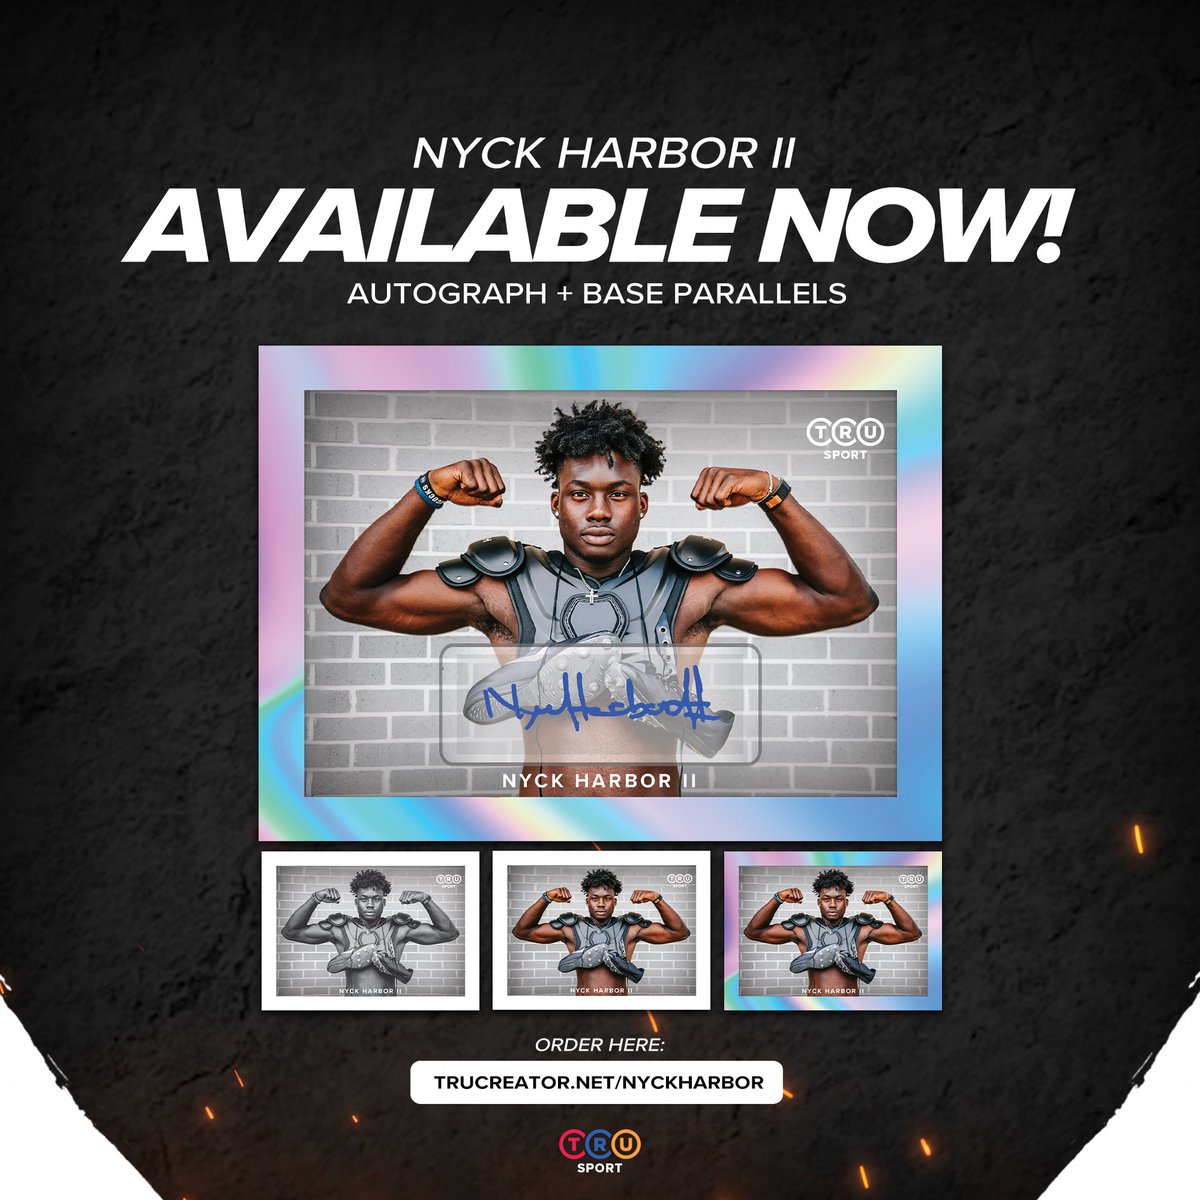 Nyck Harbor II’s first ever trading card is now officially available under our TruSport line! As a 2-sport athlete, Harbor will be a dynamic athlete for fans at large to enjoy for years. Secure your own at trucreator.net/nyckharbor ✅ #TruCreator